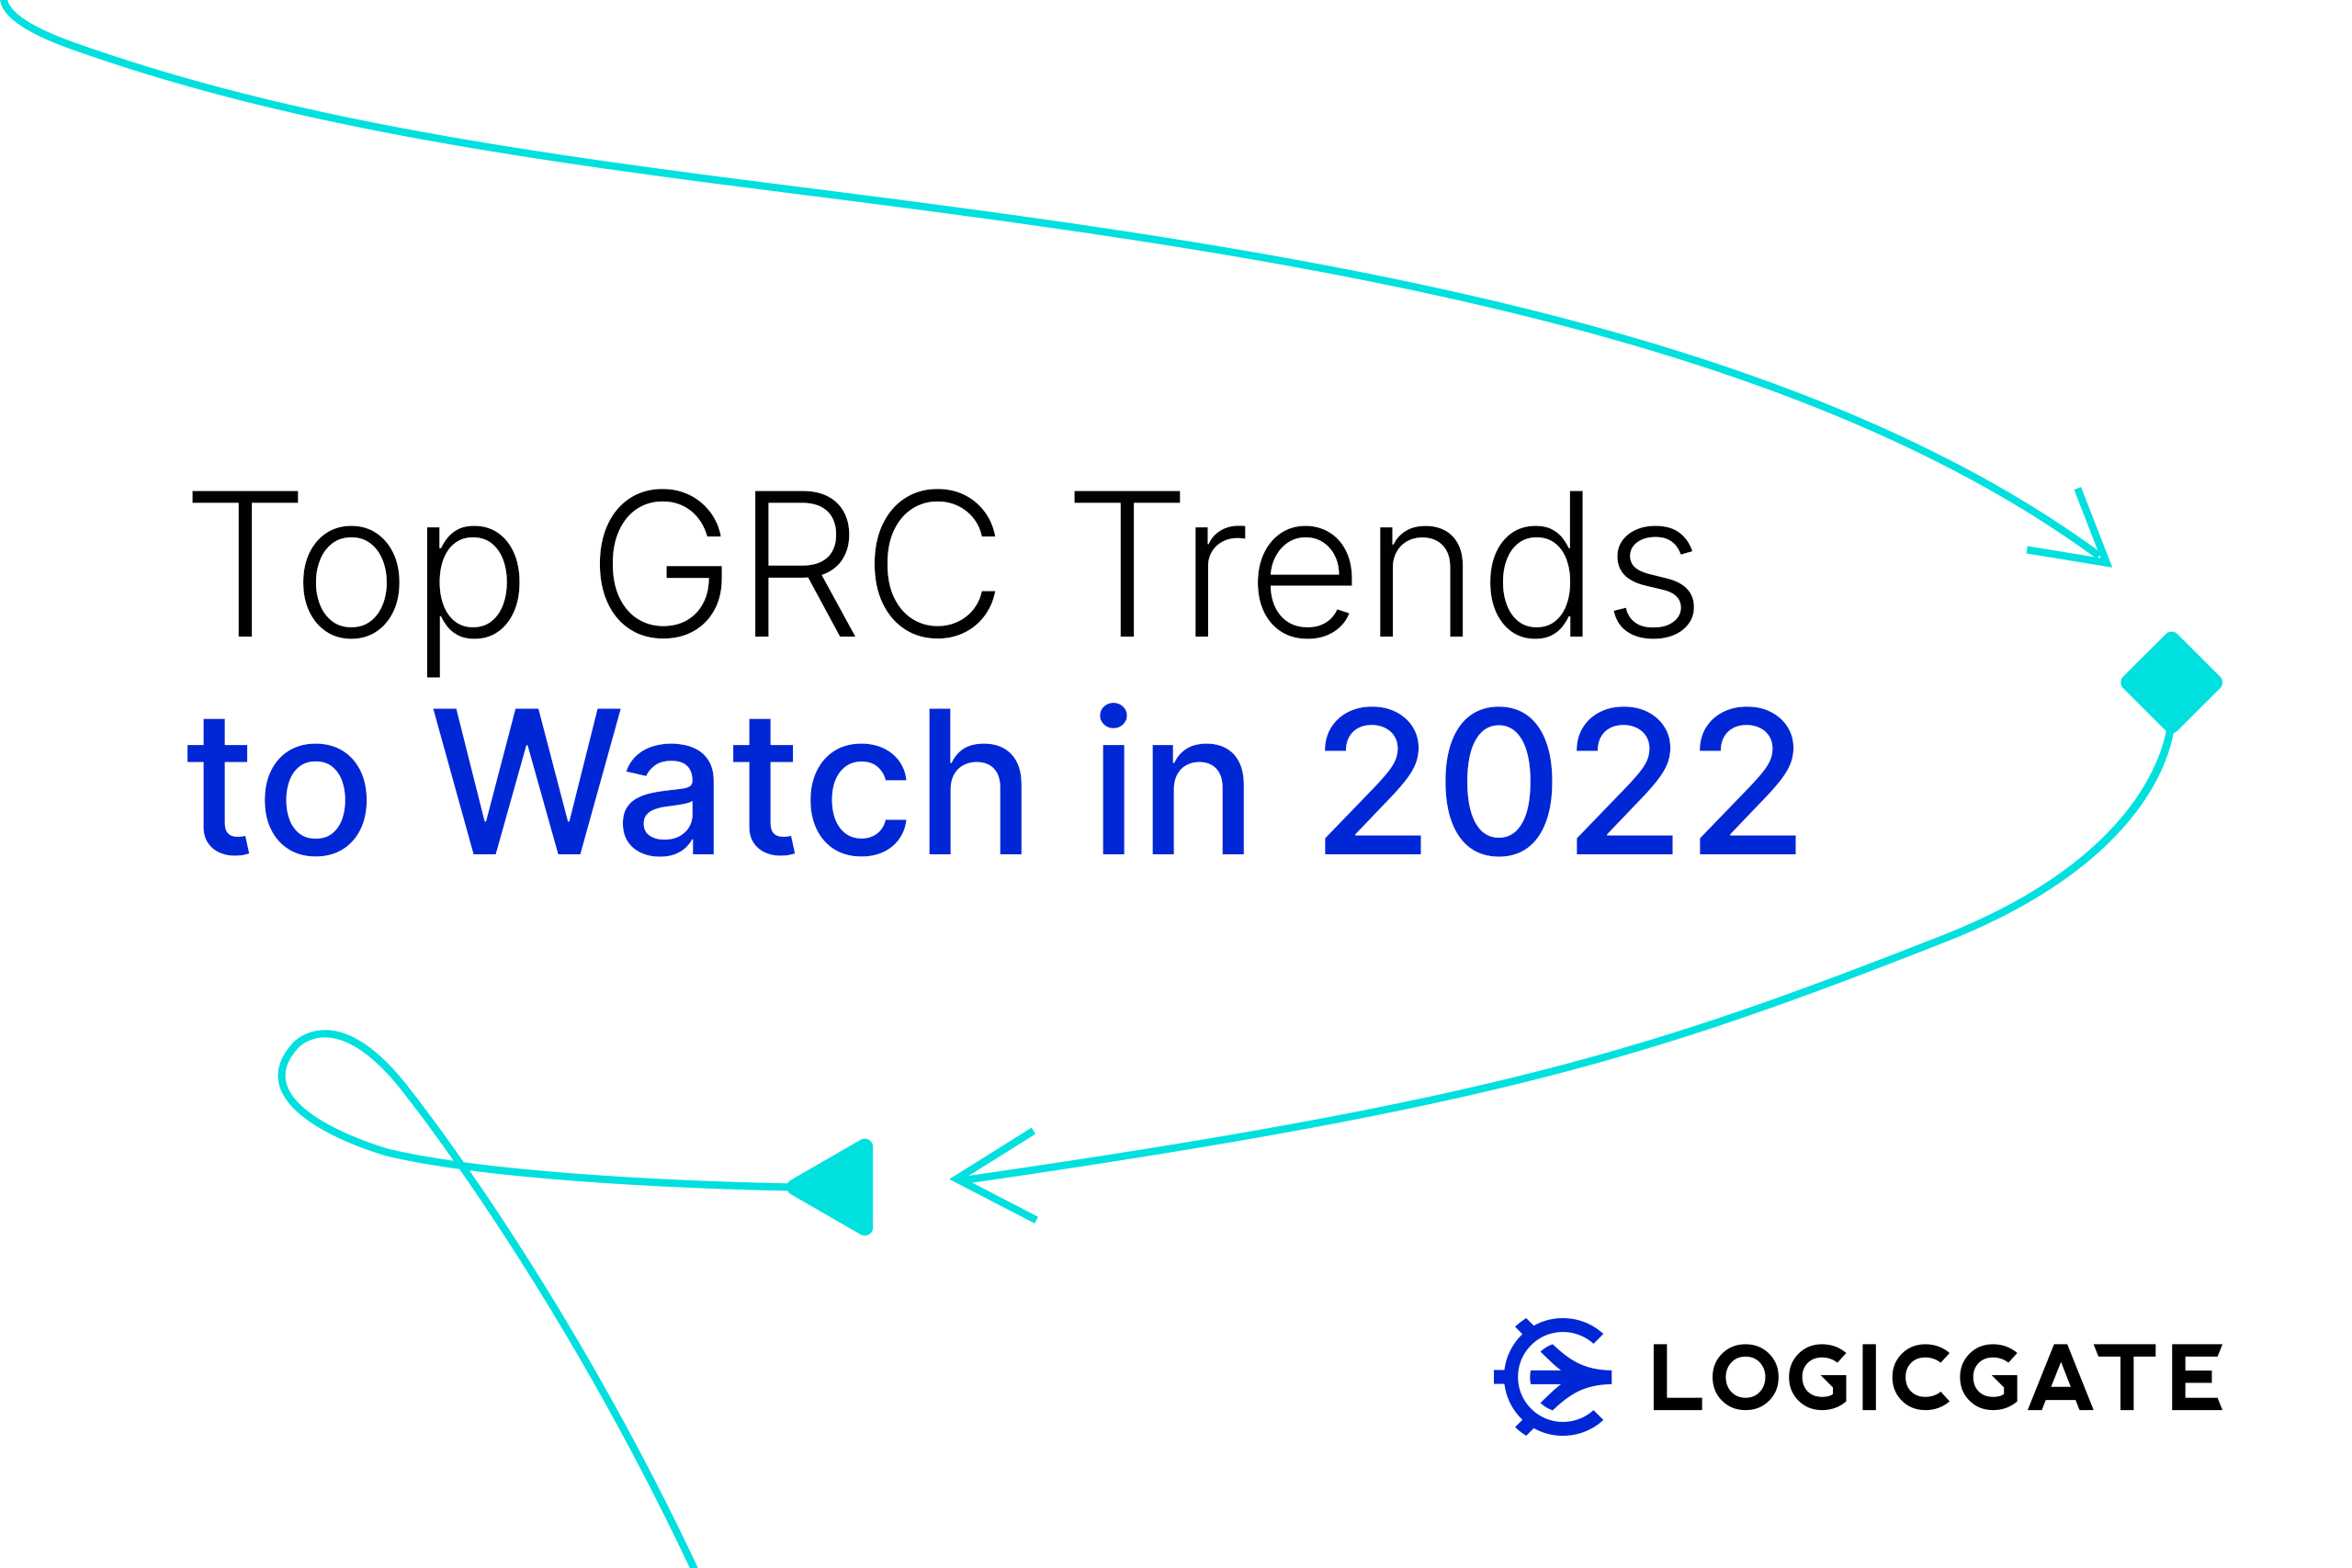 Top GRC Trends to Watch in 2022